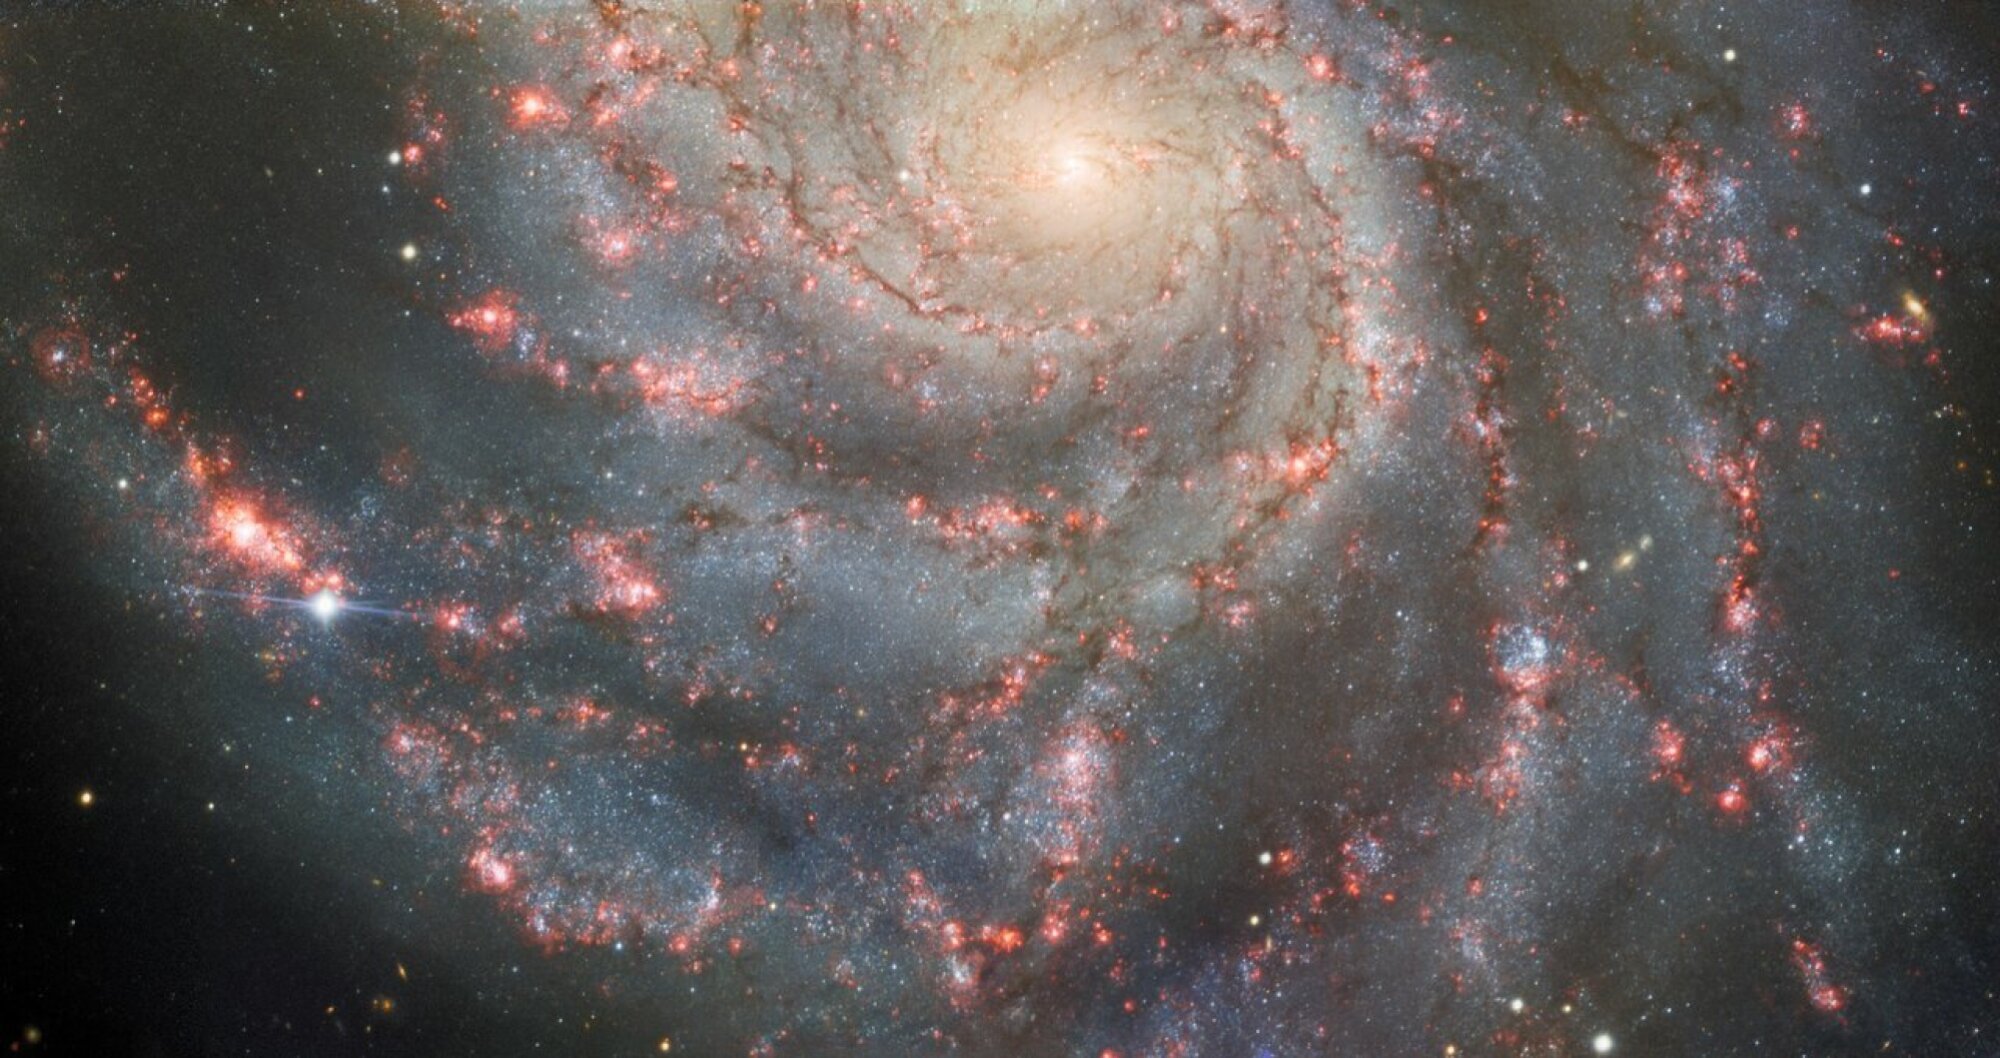 A supernova explosion spotted in the Pinwheel galaxy.